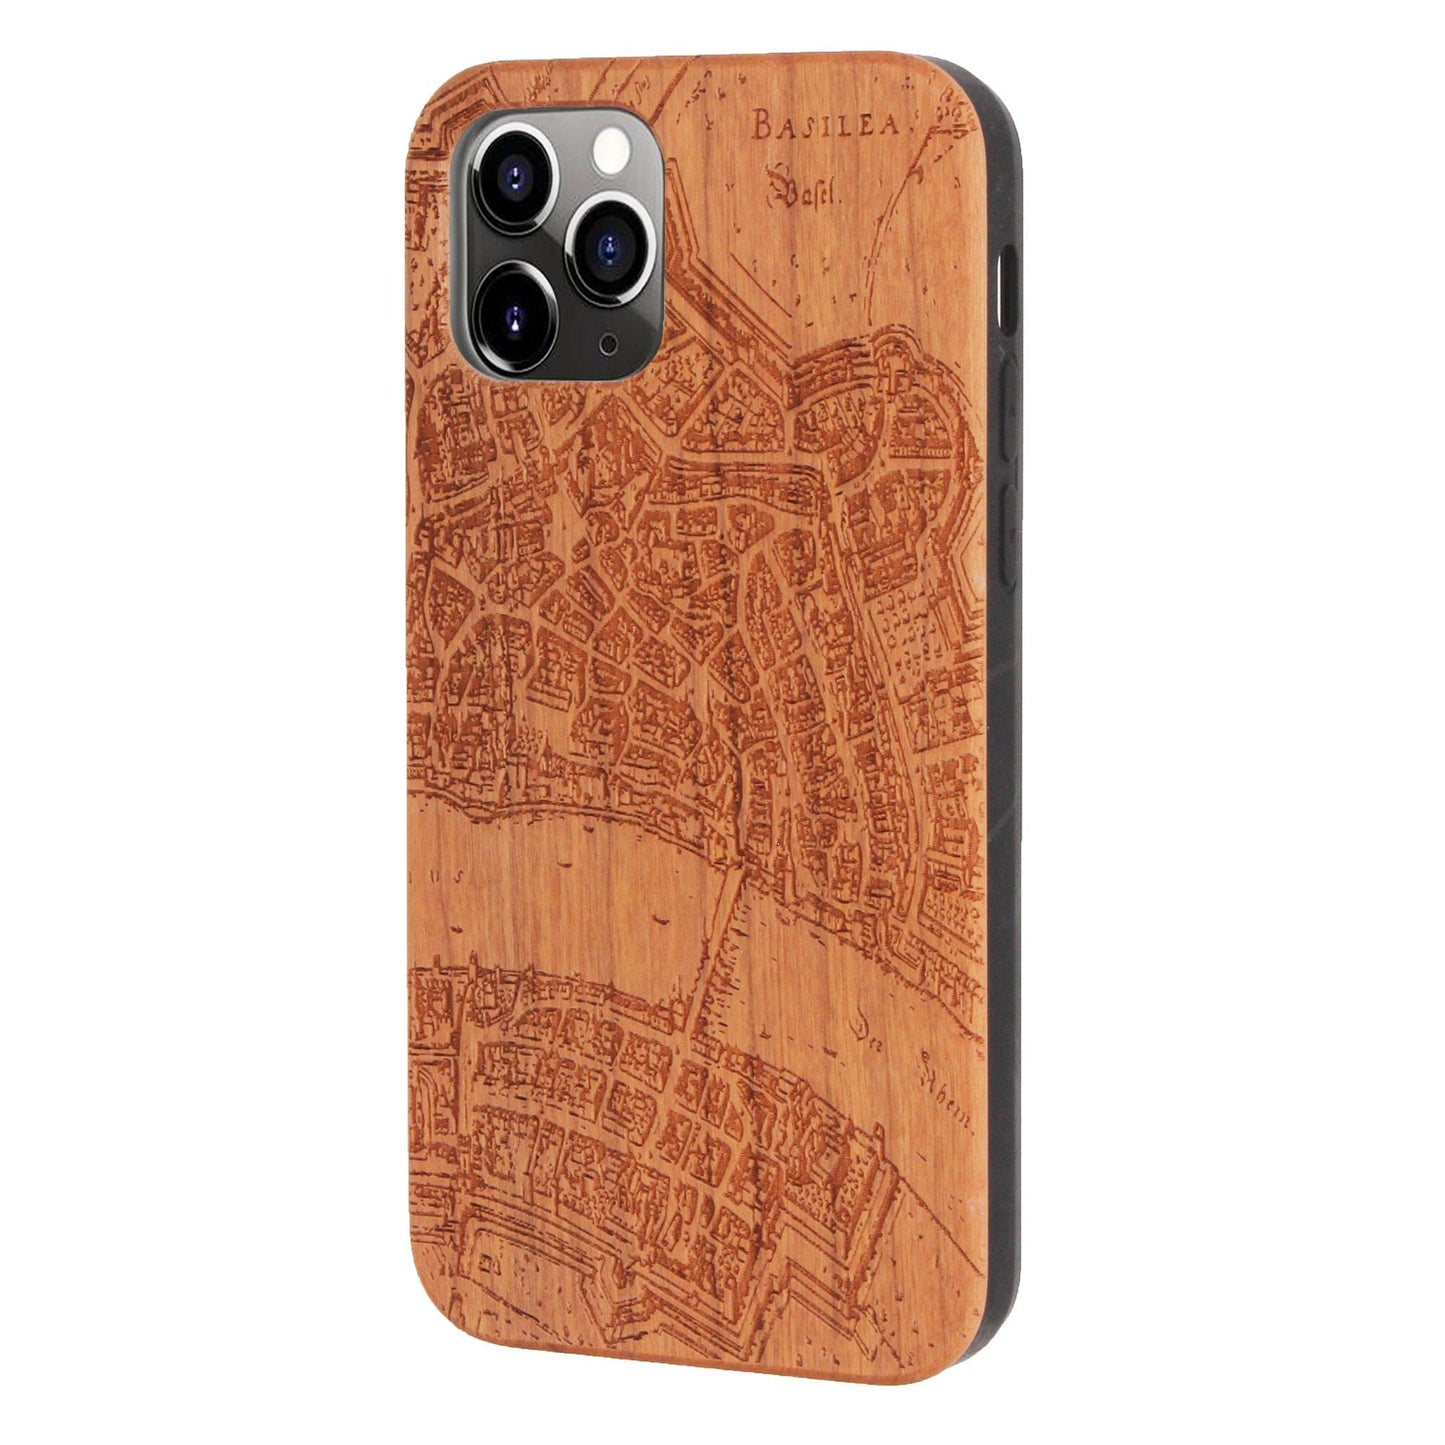 Basel Merian Eden case made of cherry wood for iPhone 11 Pro Max